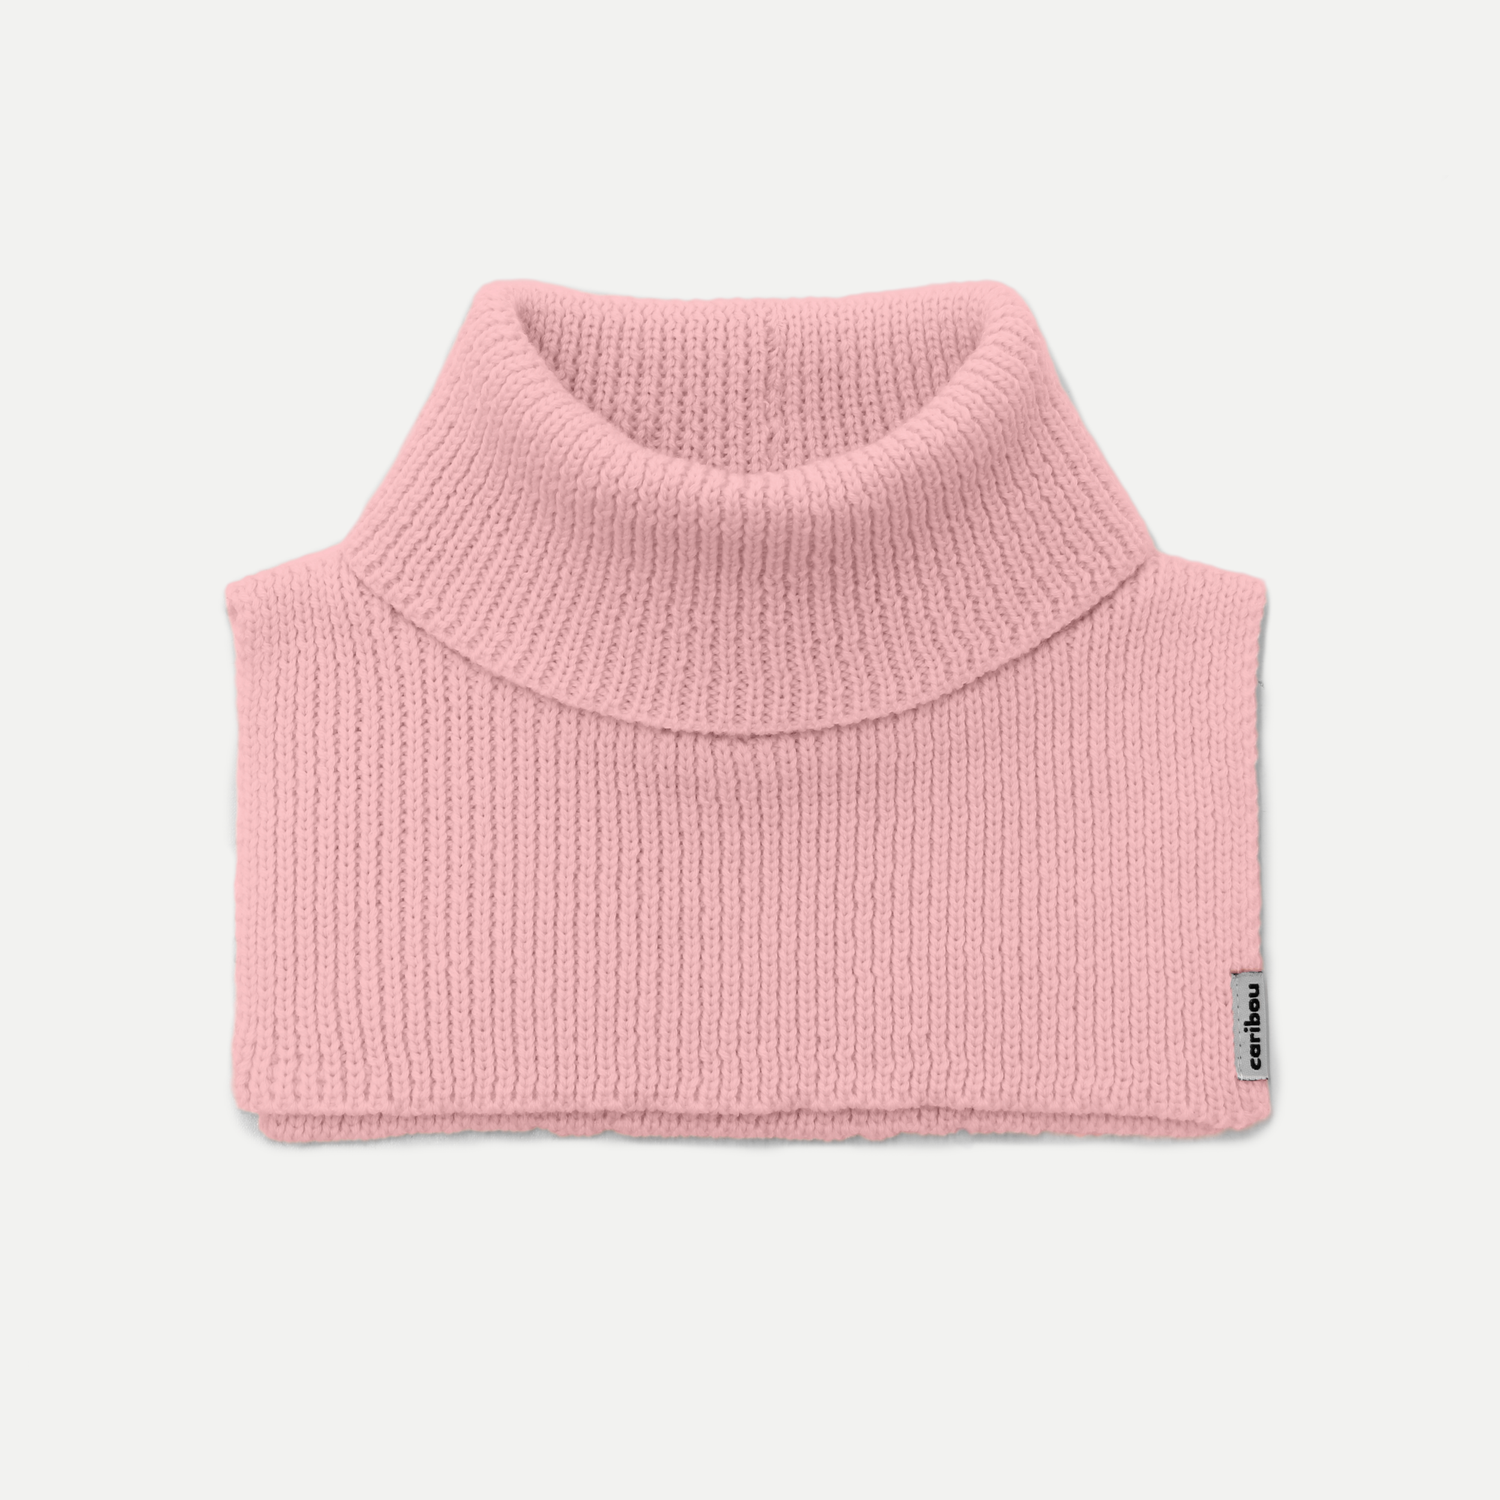 Neck warmer - 8 colors